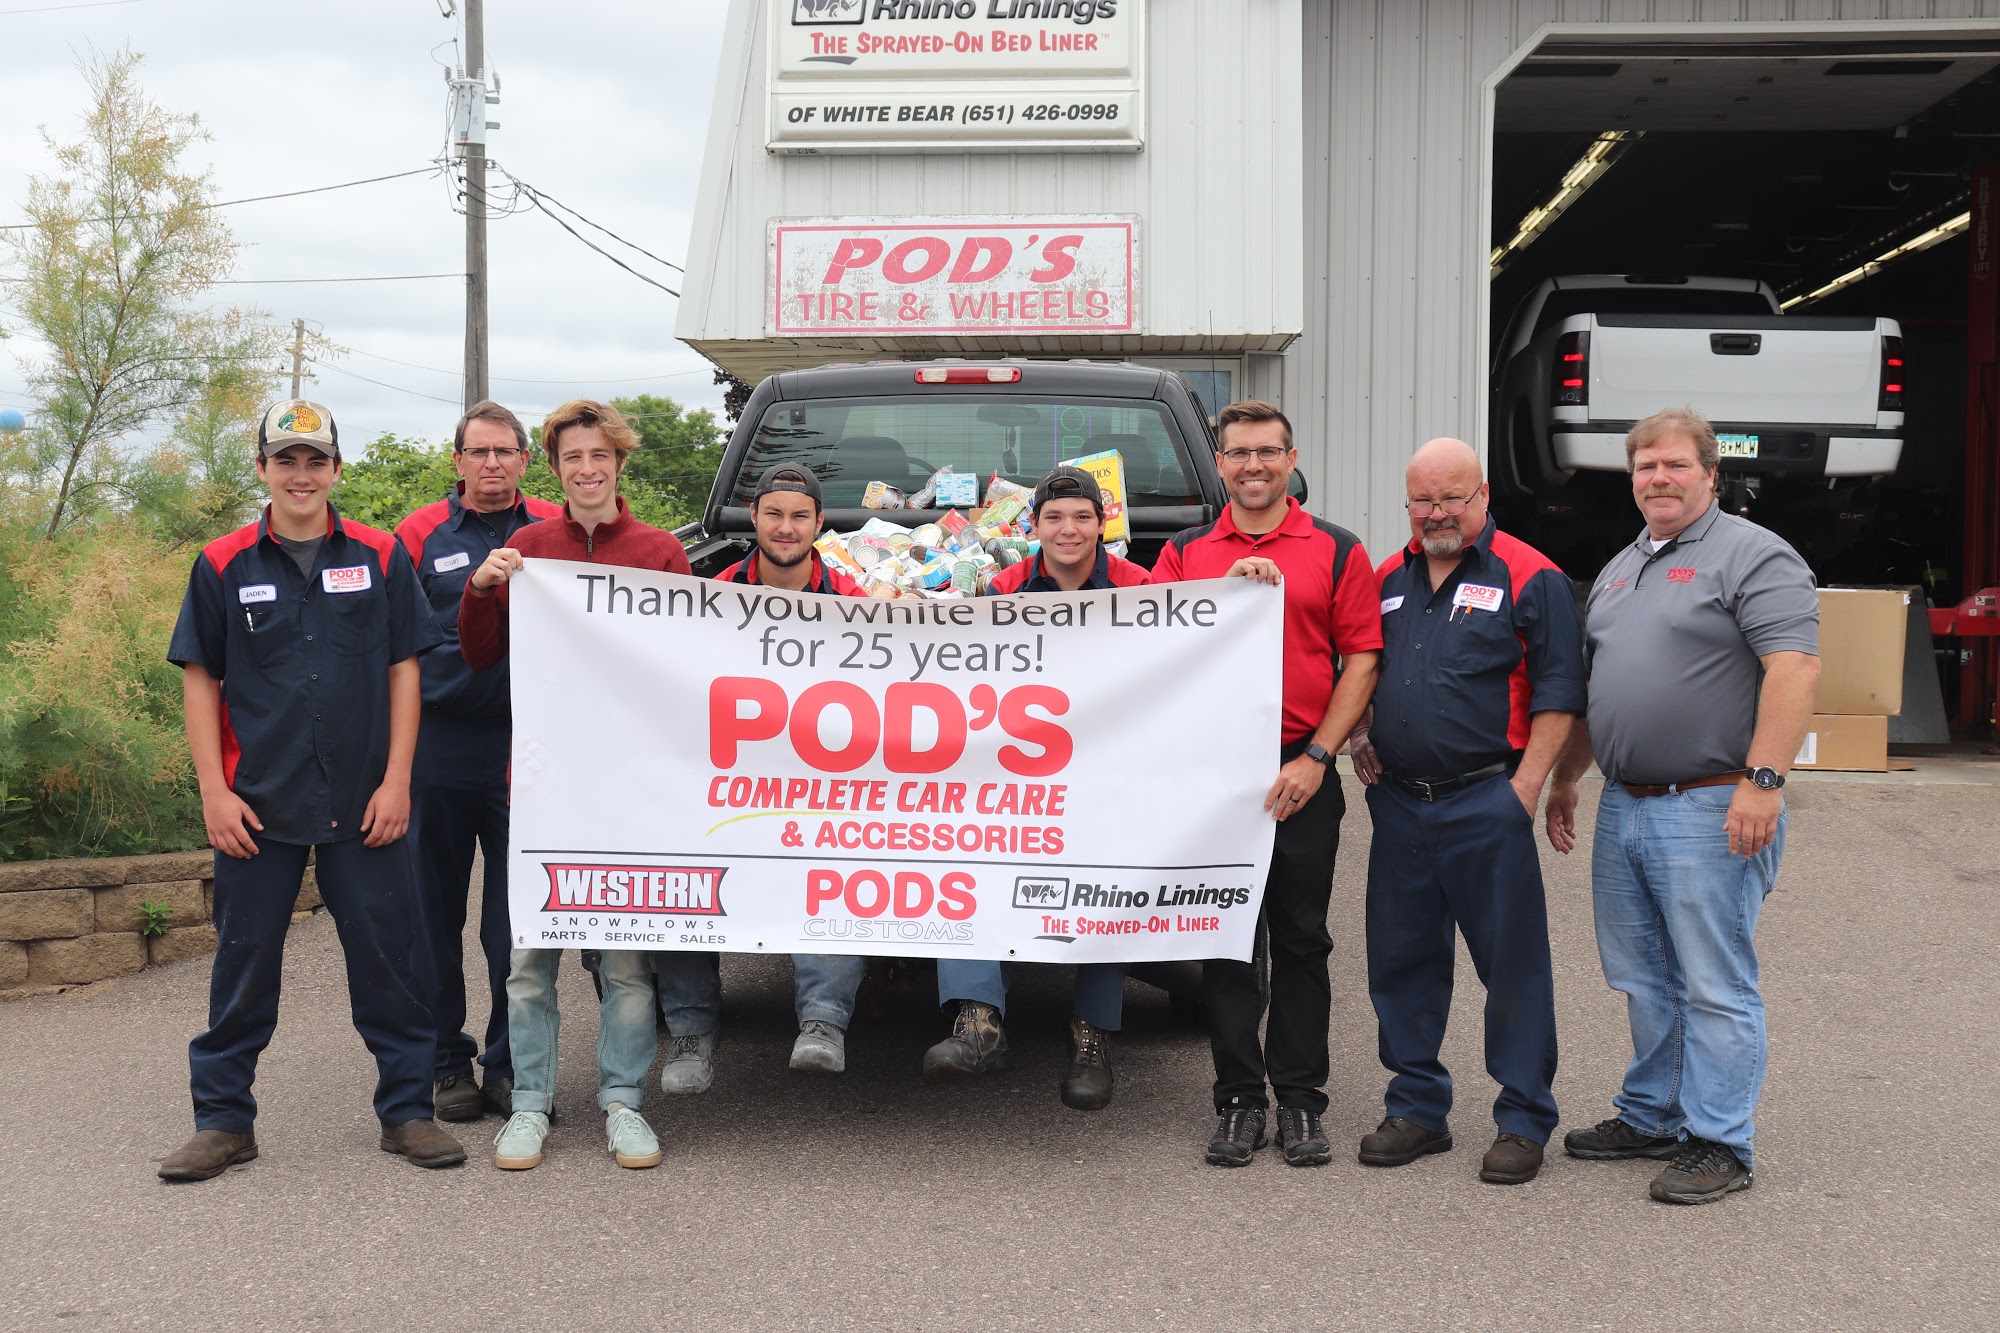 Pods Complete Car Care and Accessories